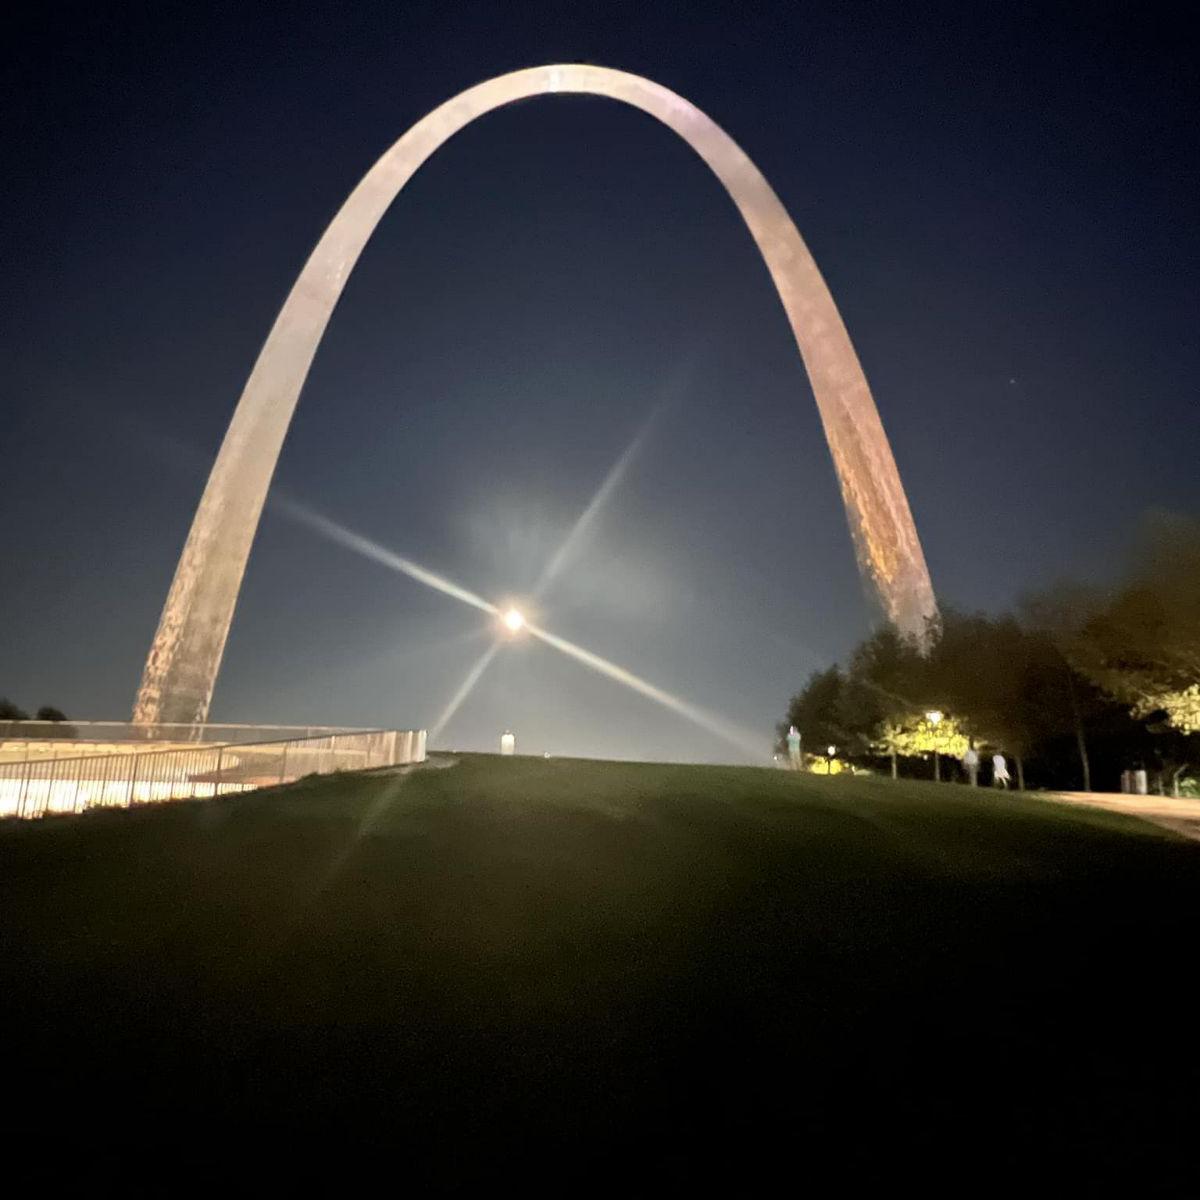 The Arch was so beautifully illuminated under the light of the moon.